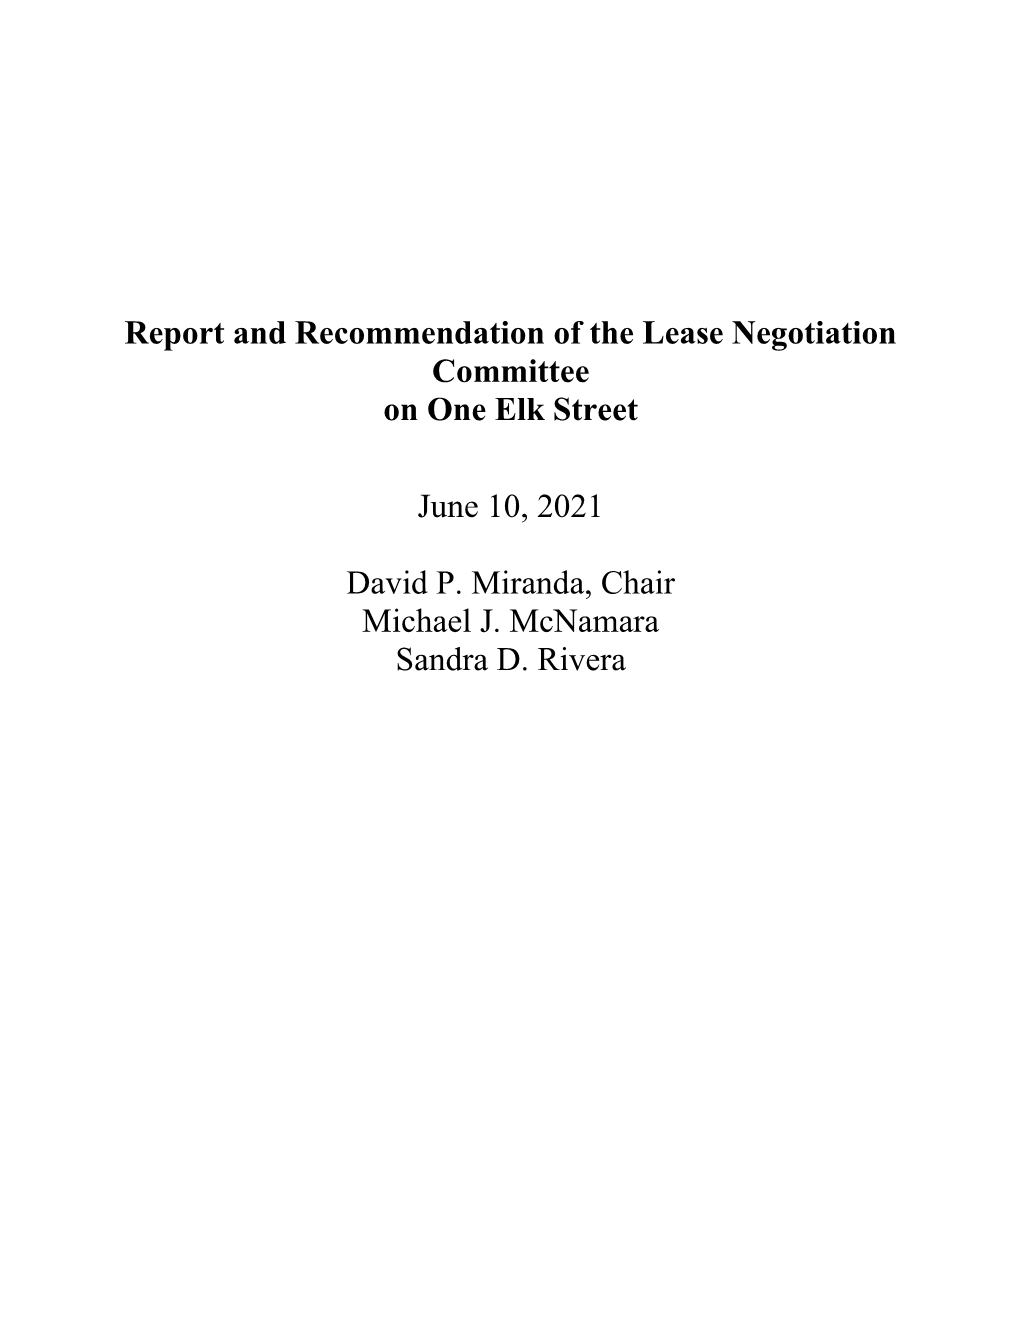 Report and Recommendation of the Lease Negotiation Committee on One Elk Street